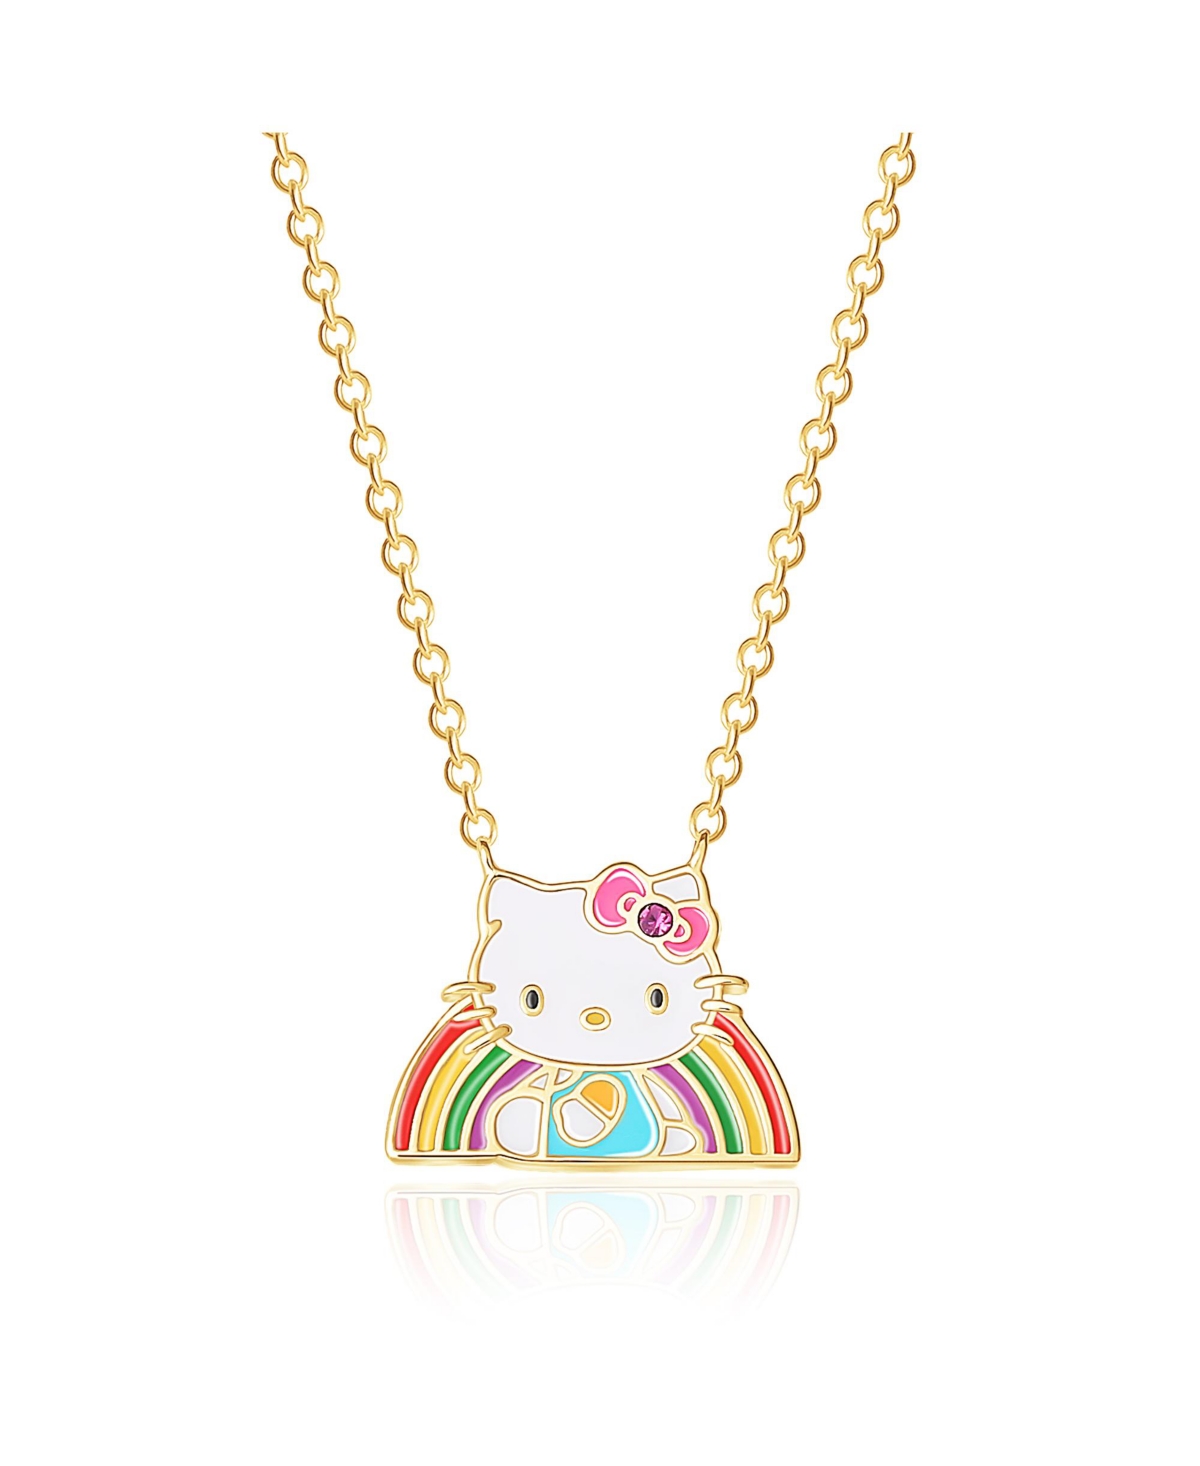 Sanrio Yellow Gold Plated Crystal Rainbow Necklace - 18'' Chain, Officially Licensed Authentic - Red, yellow, green